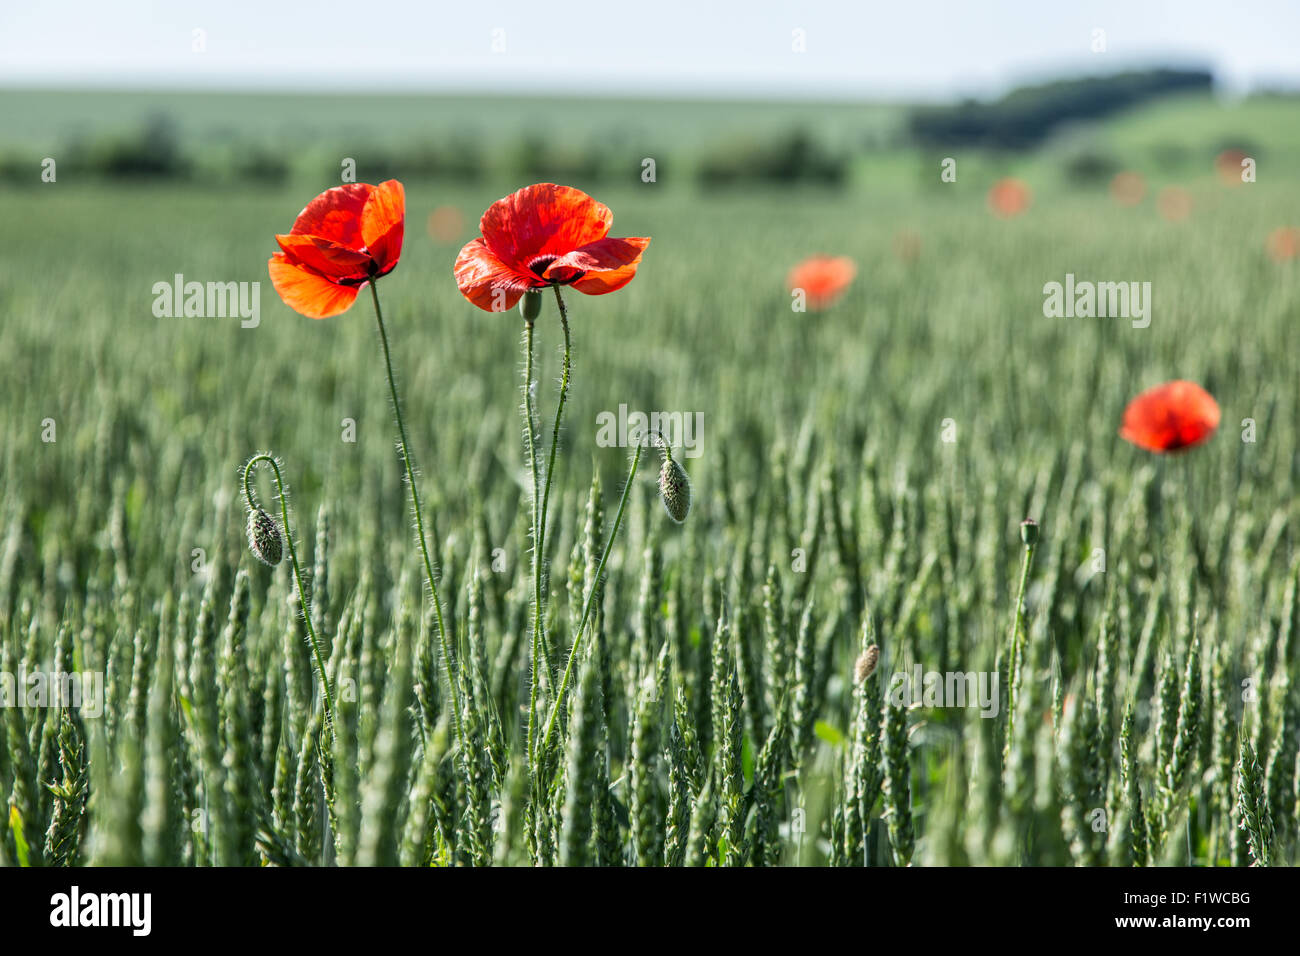 Field of red dainty poppies. Nature background. Stock Photo